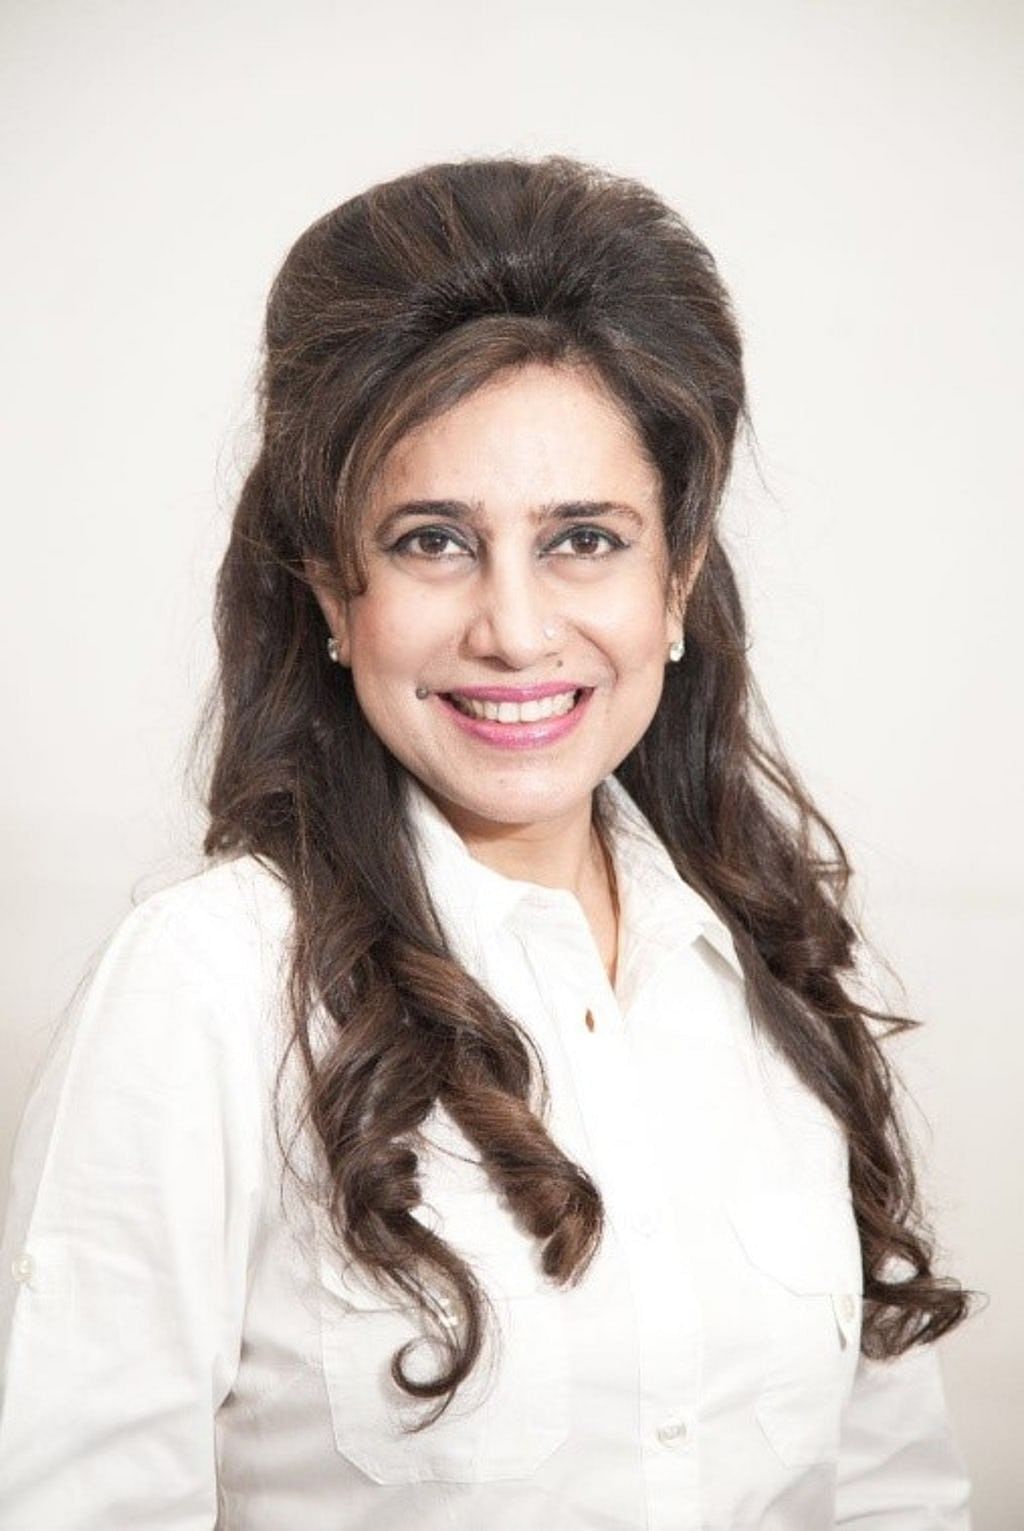 
















Suzy Singh is a Transpersonal Therapist, Karma Coach, Relationship
Counsellor and Spiritual Teacher